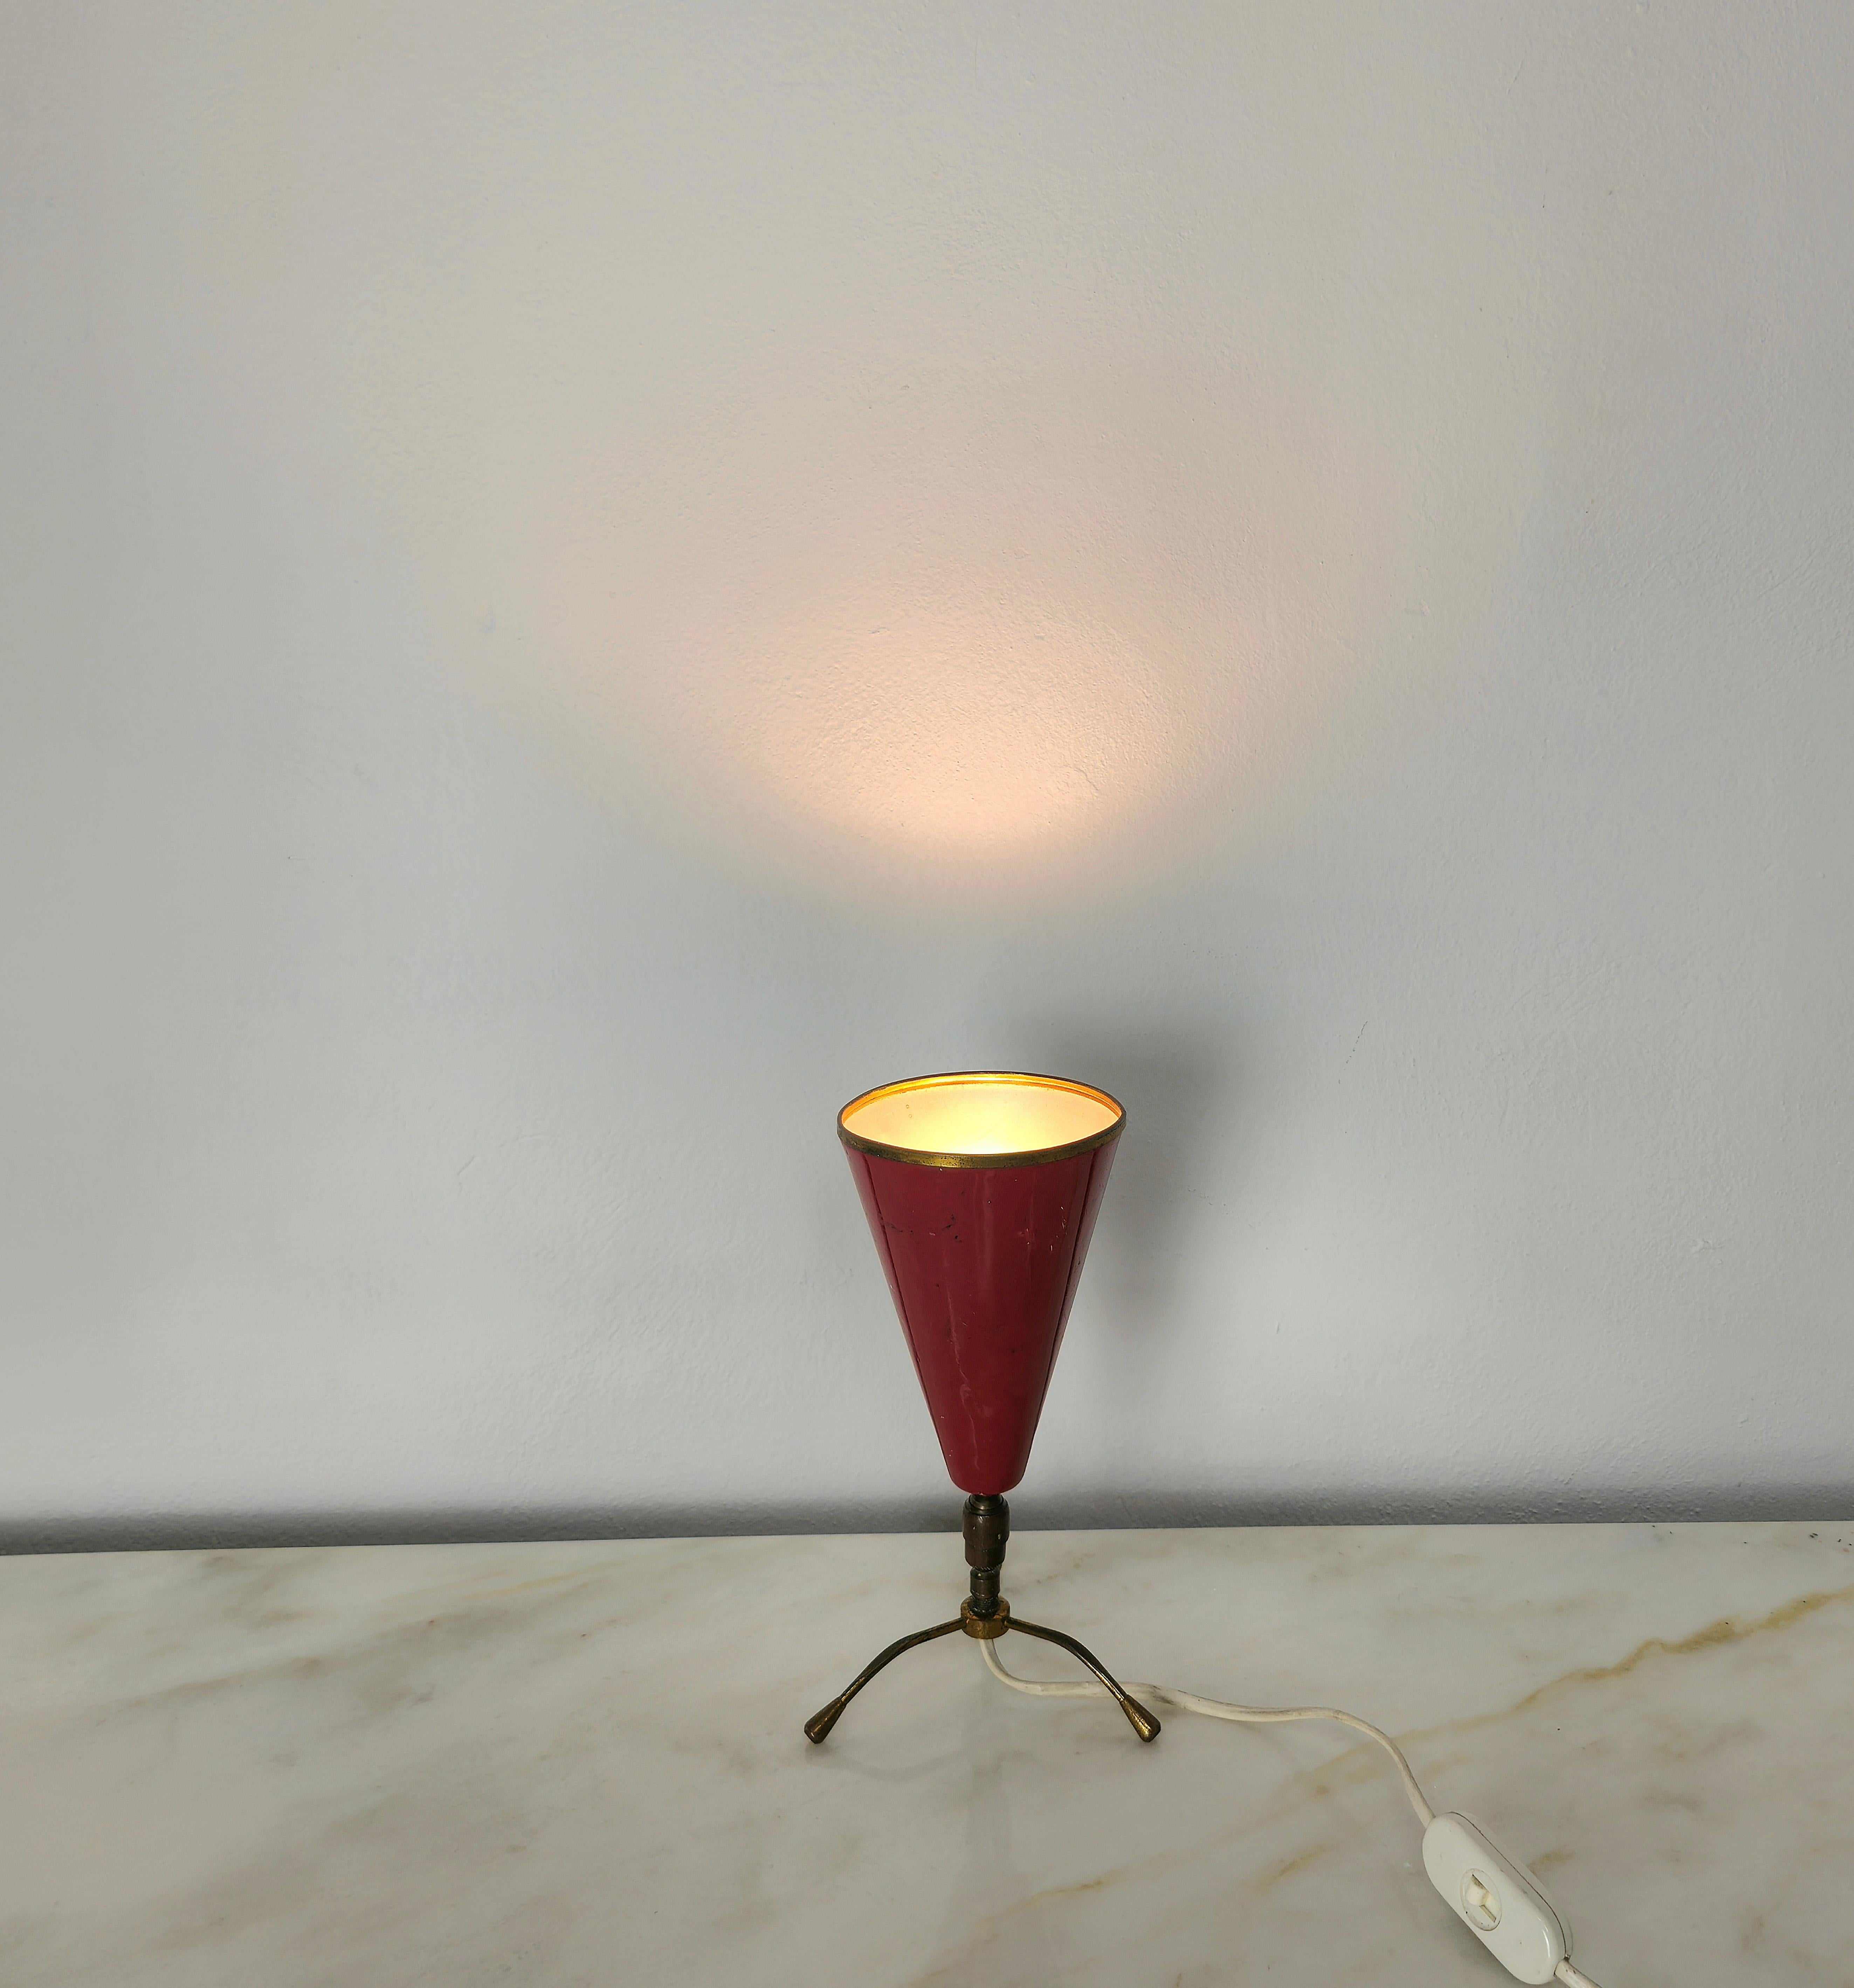 Tripod table lamp with 1 E14 light attributable to Arredoluce in red enamelled aluminum and brass. The particularity of this lamp is the brass joint that allows the conical diffuser to be directed as desired.



Note: We try to offer our customers